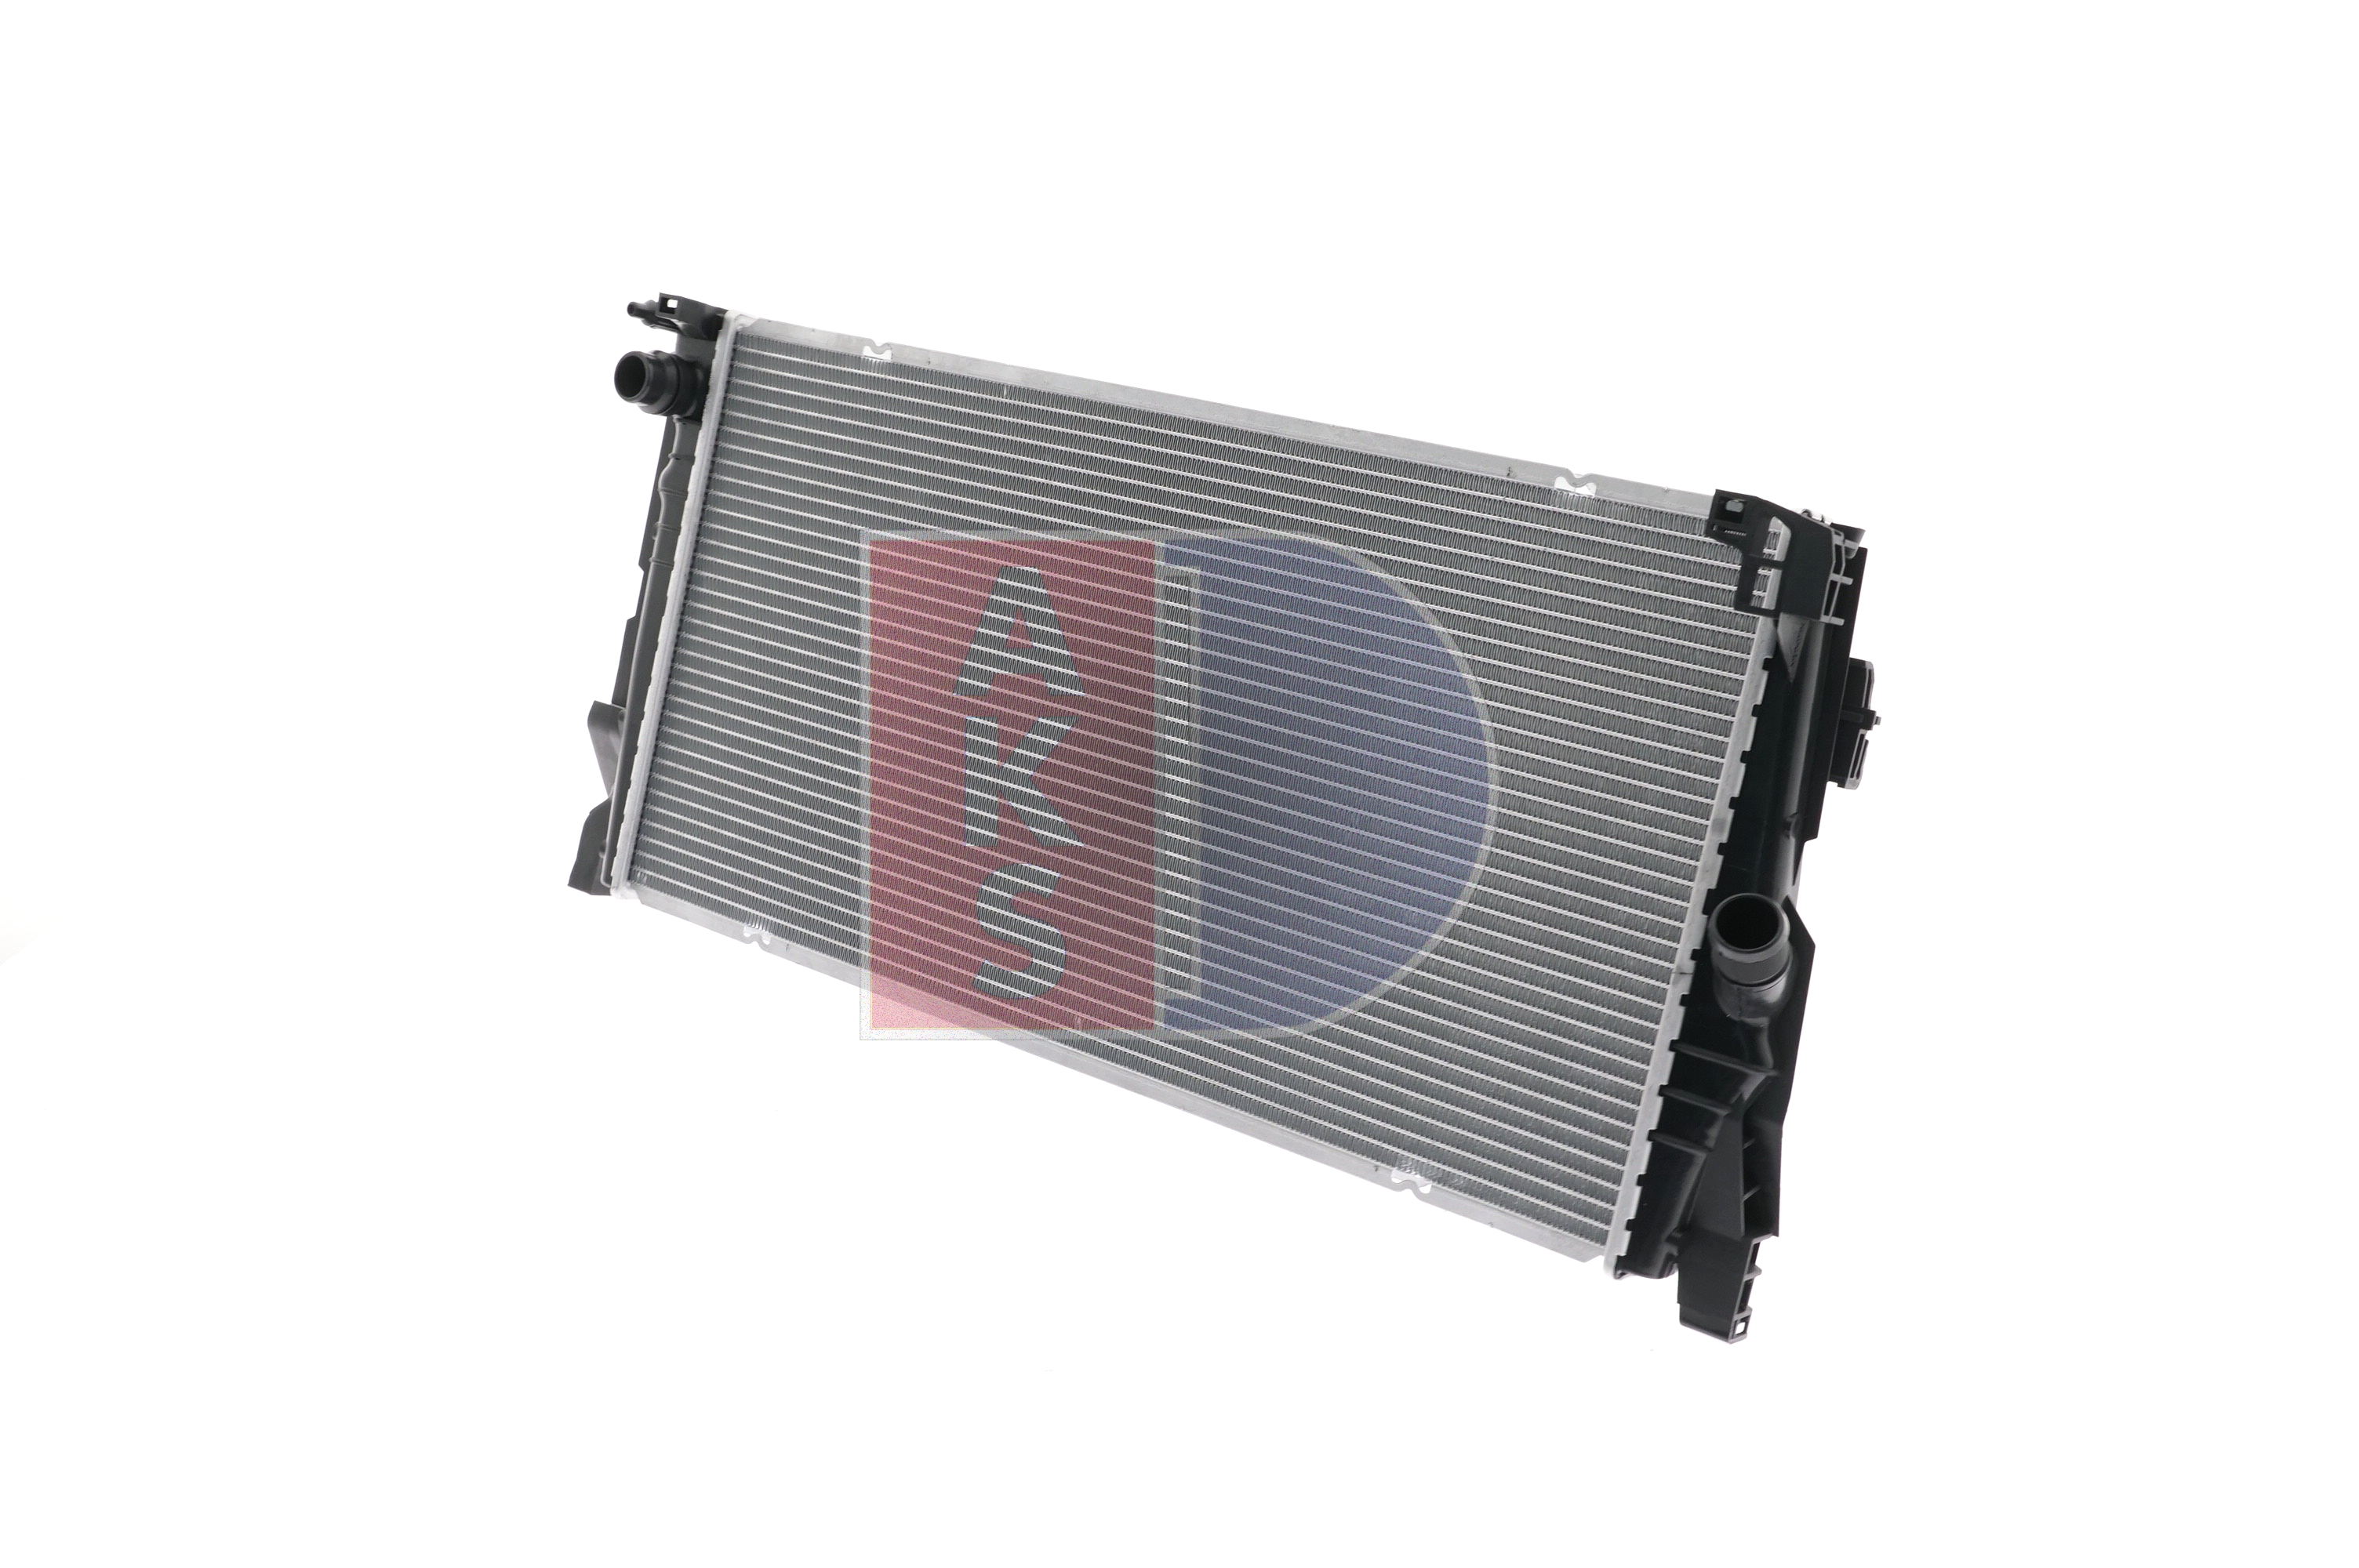 AKS DASIS 050093N Engine radiator Aluminium, for vehicles with air conditioning, 680 x 351 x 26 mm, Brazed cooling fins